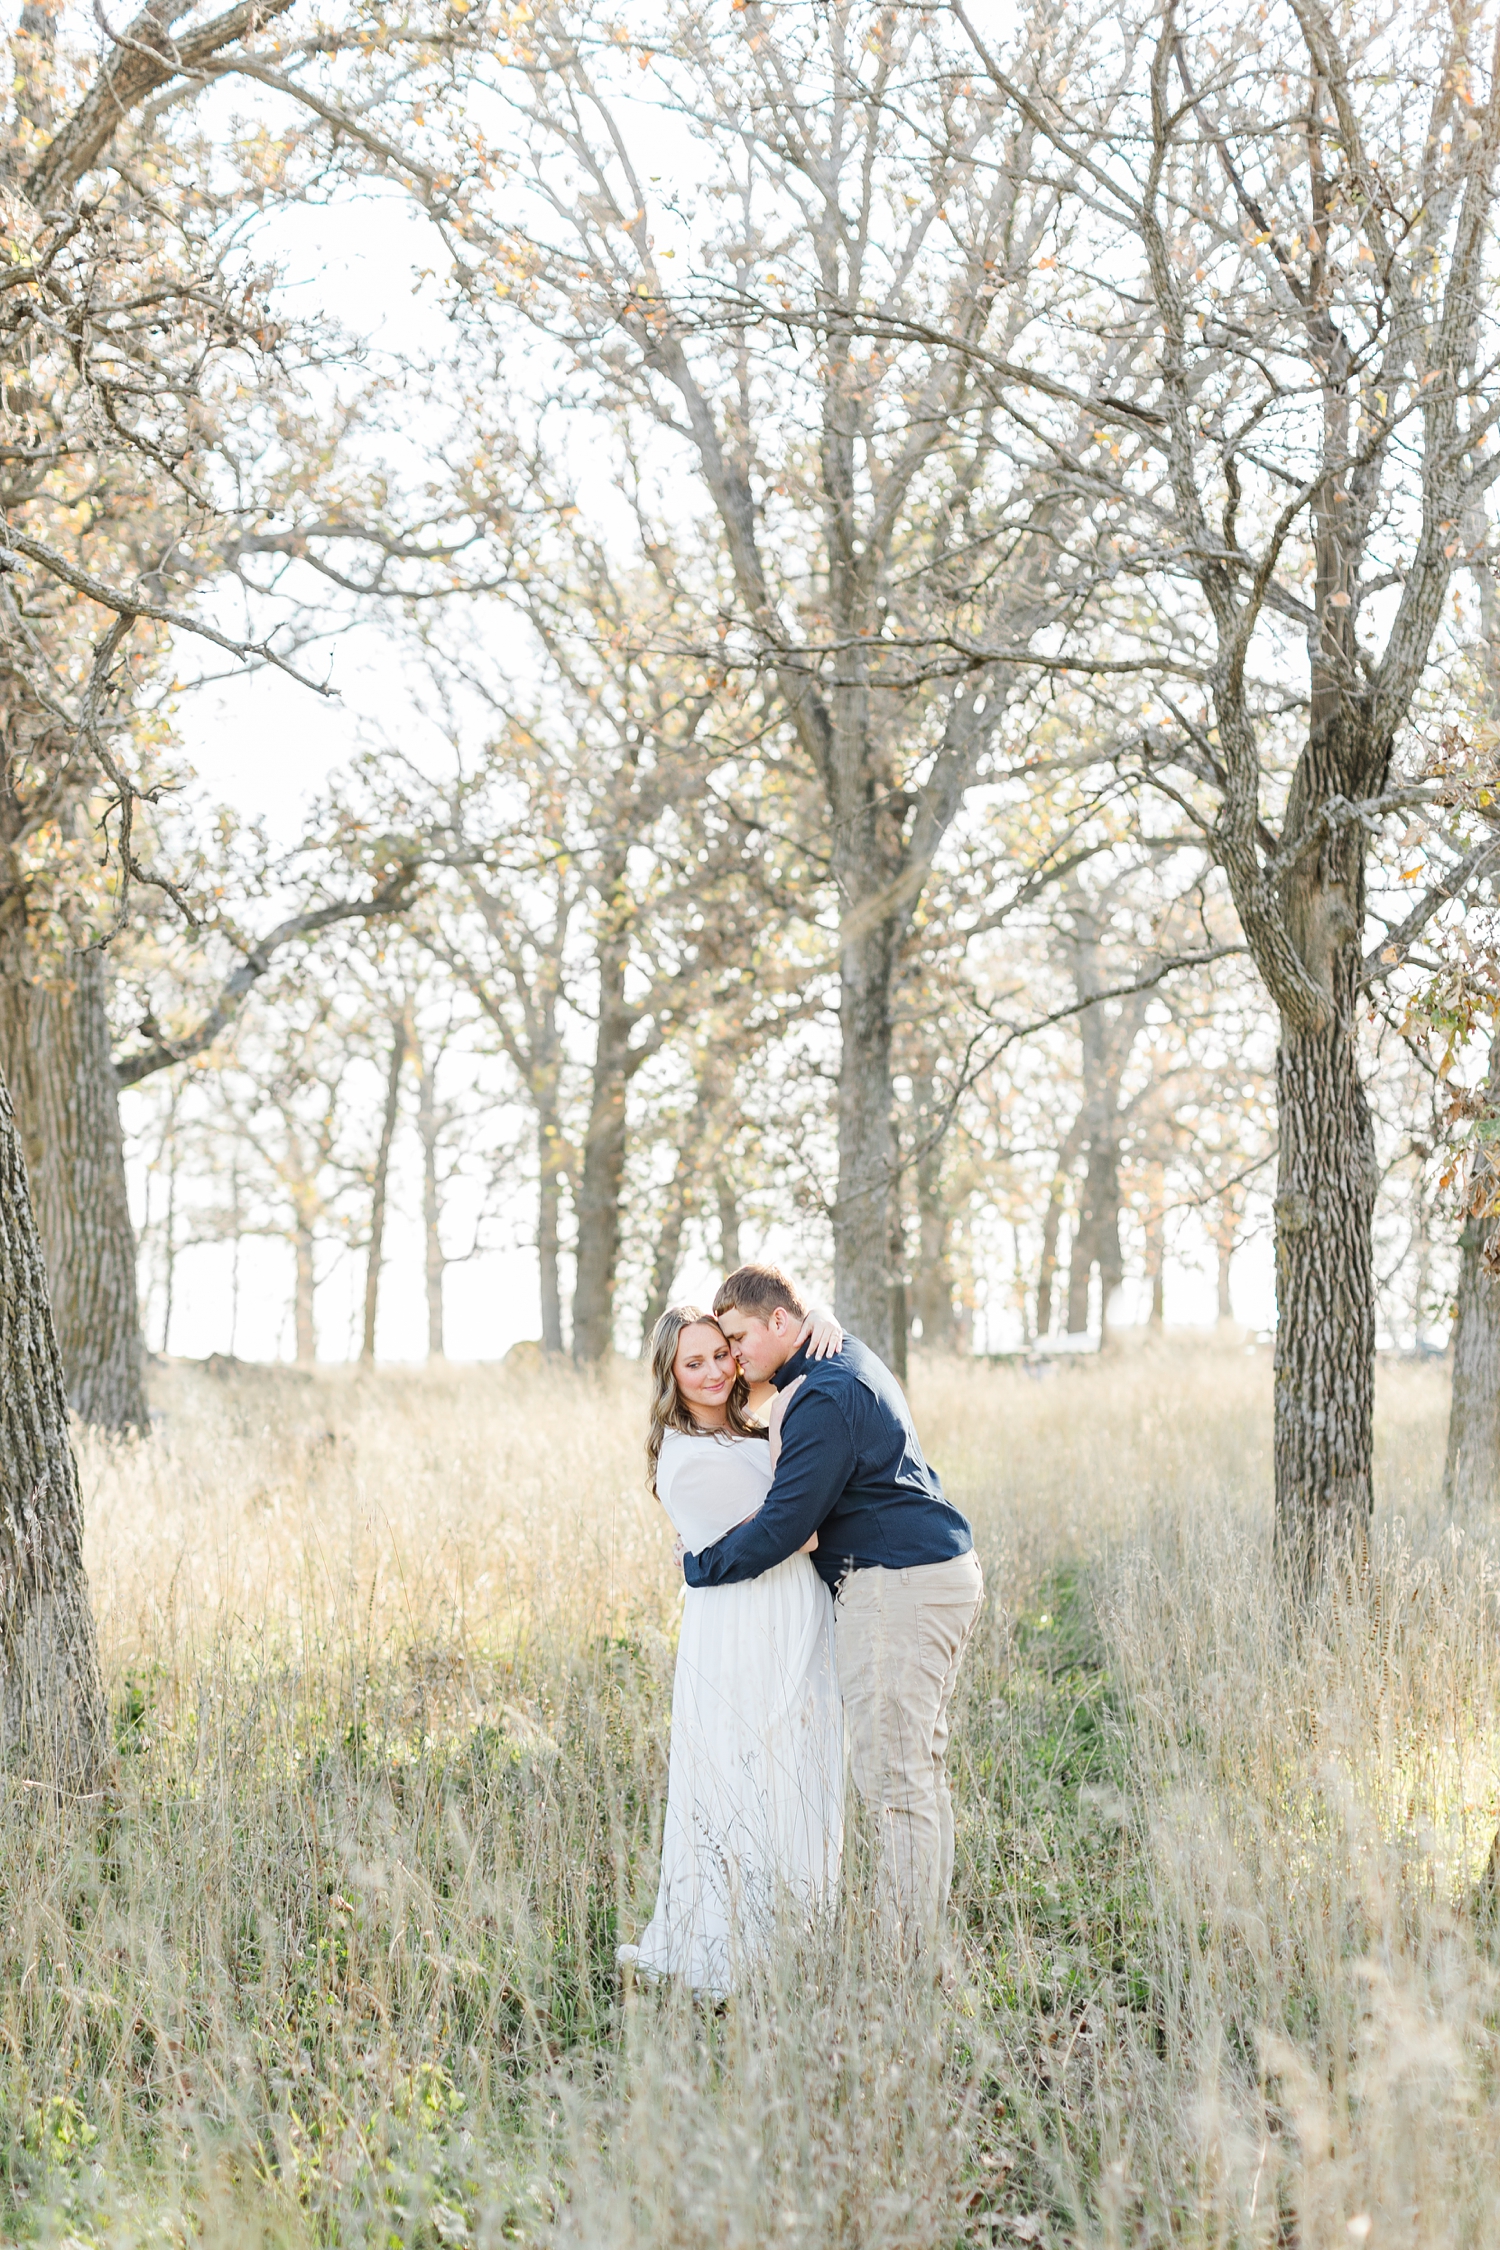 Taylor nuzzles Shelby in a grass pasture in Iowa | CB Studio